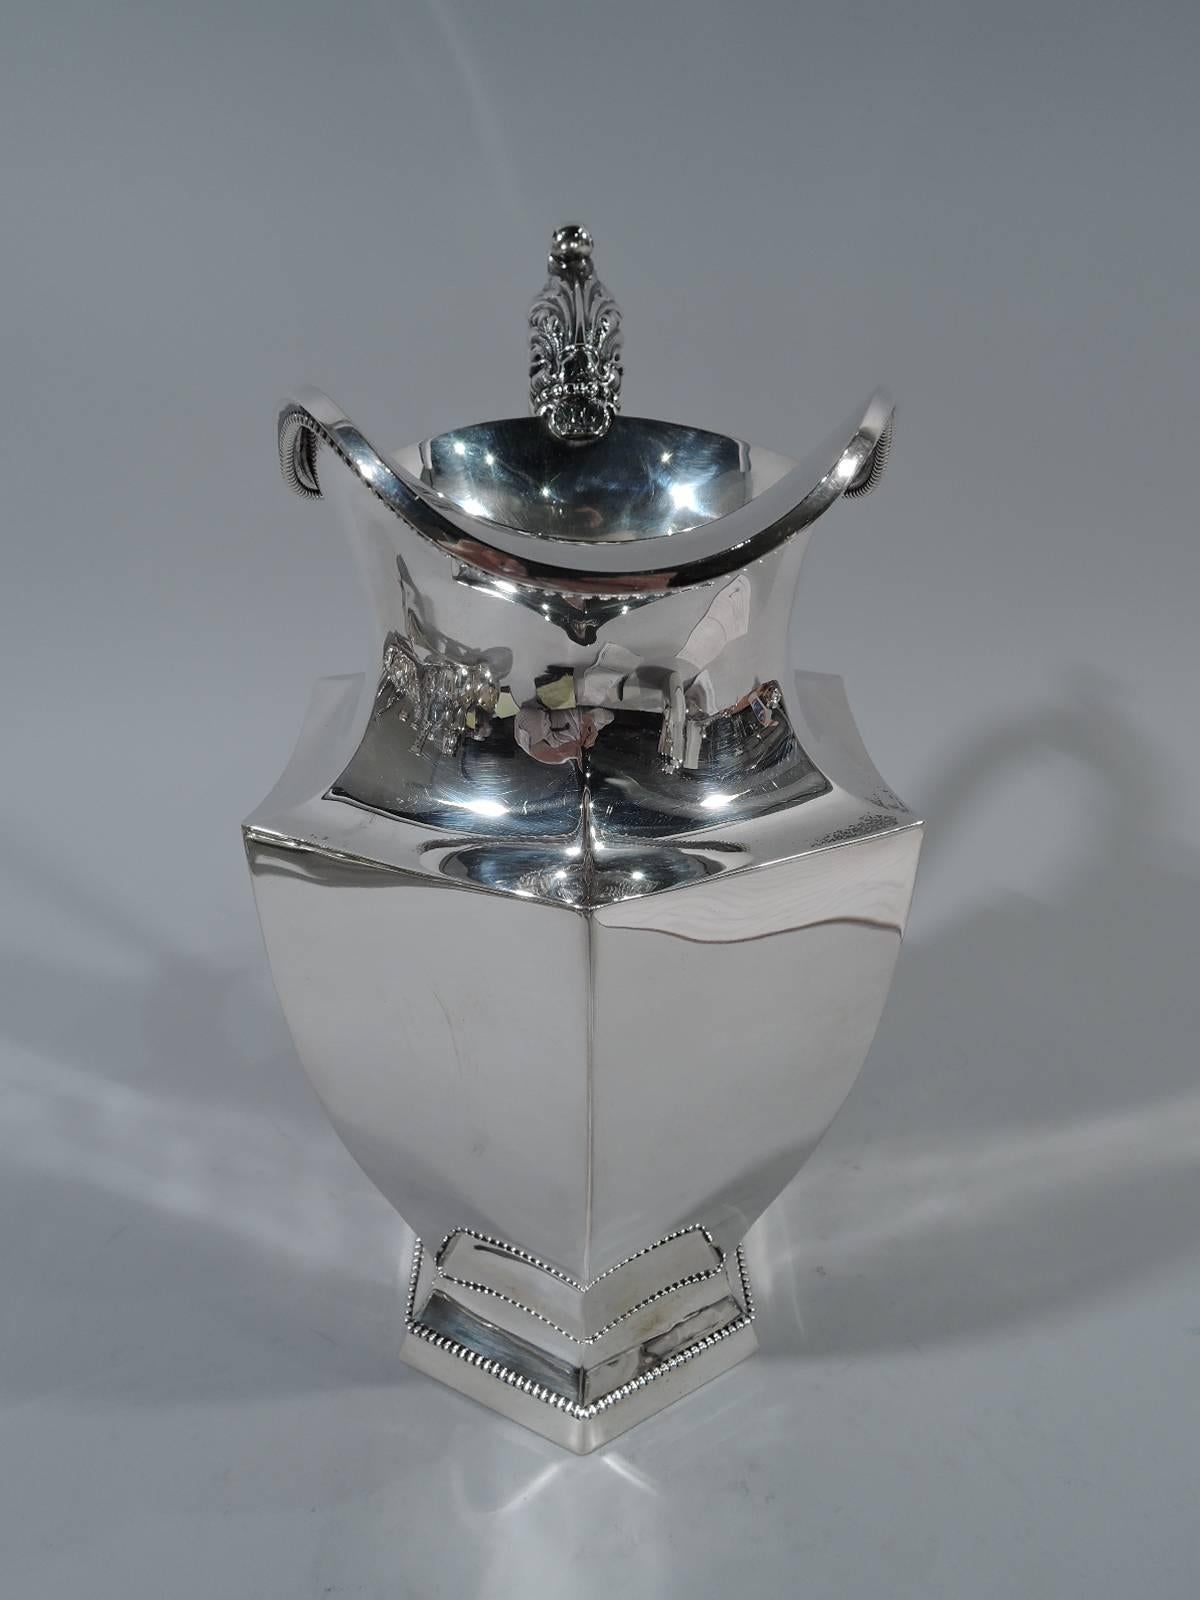 Art Deco sterling silver water pitcher. Made by R. Wallace & Sons in in Wallingford, Conn., circa 1910. Faceted and tapering body with faceted foot. Mouth, foot, and handle rims have applied beading. Handle has leaf cap and mount. An unusual mix of